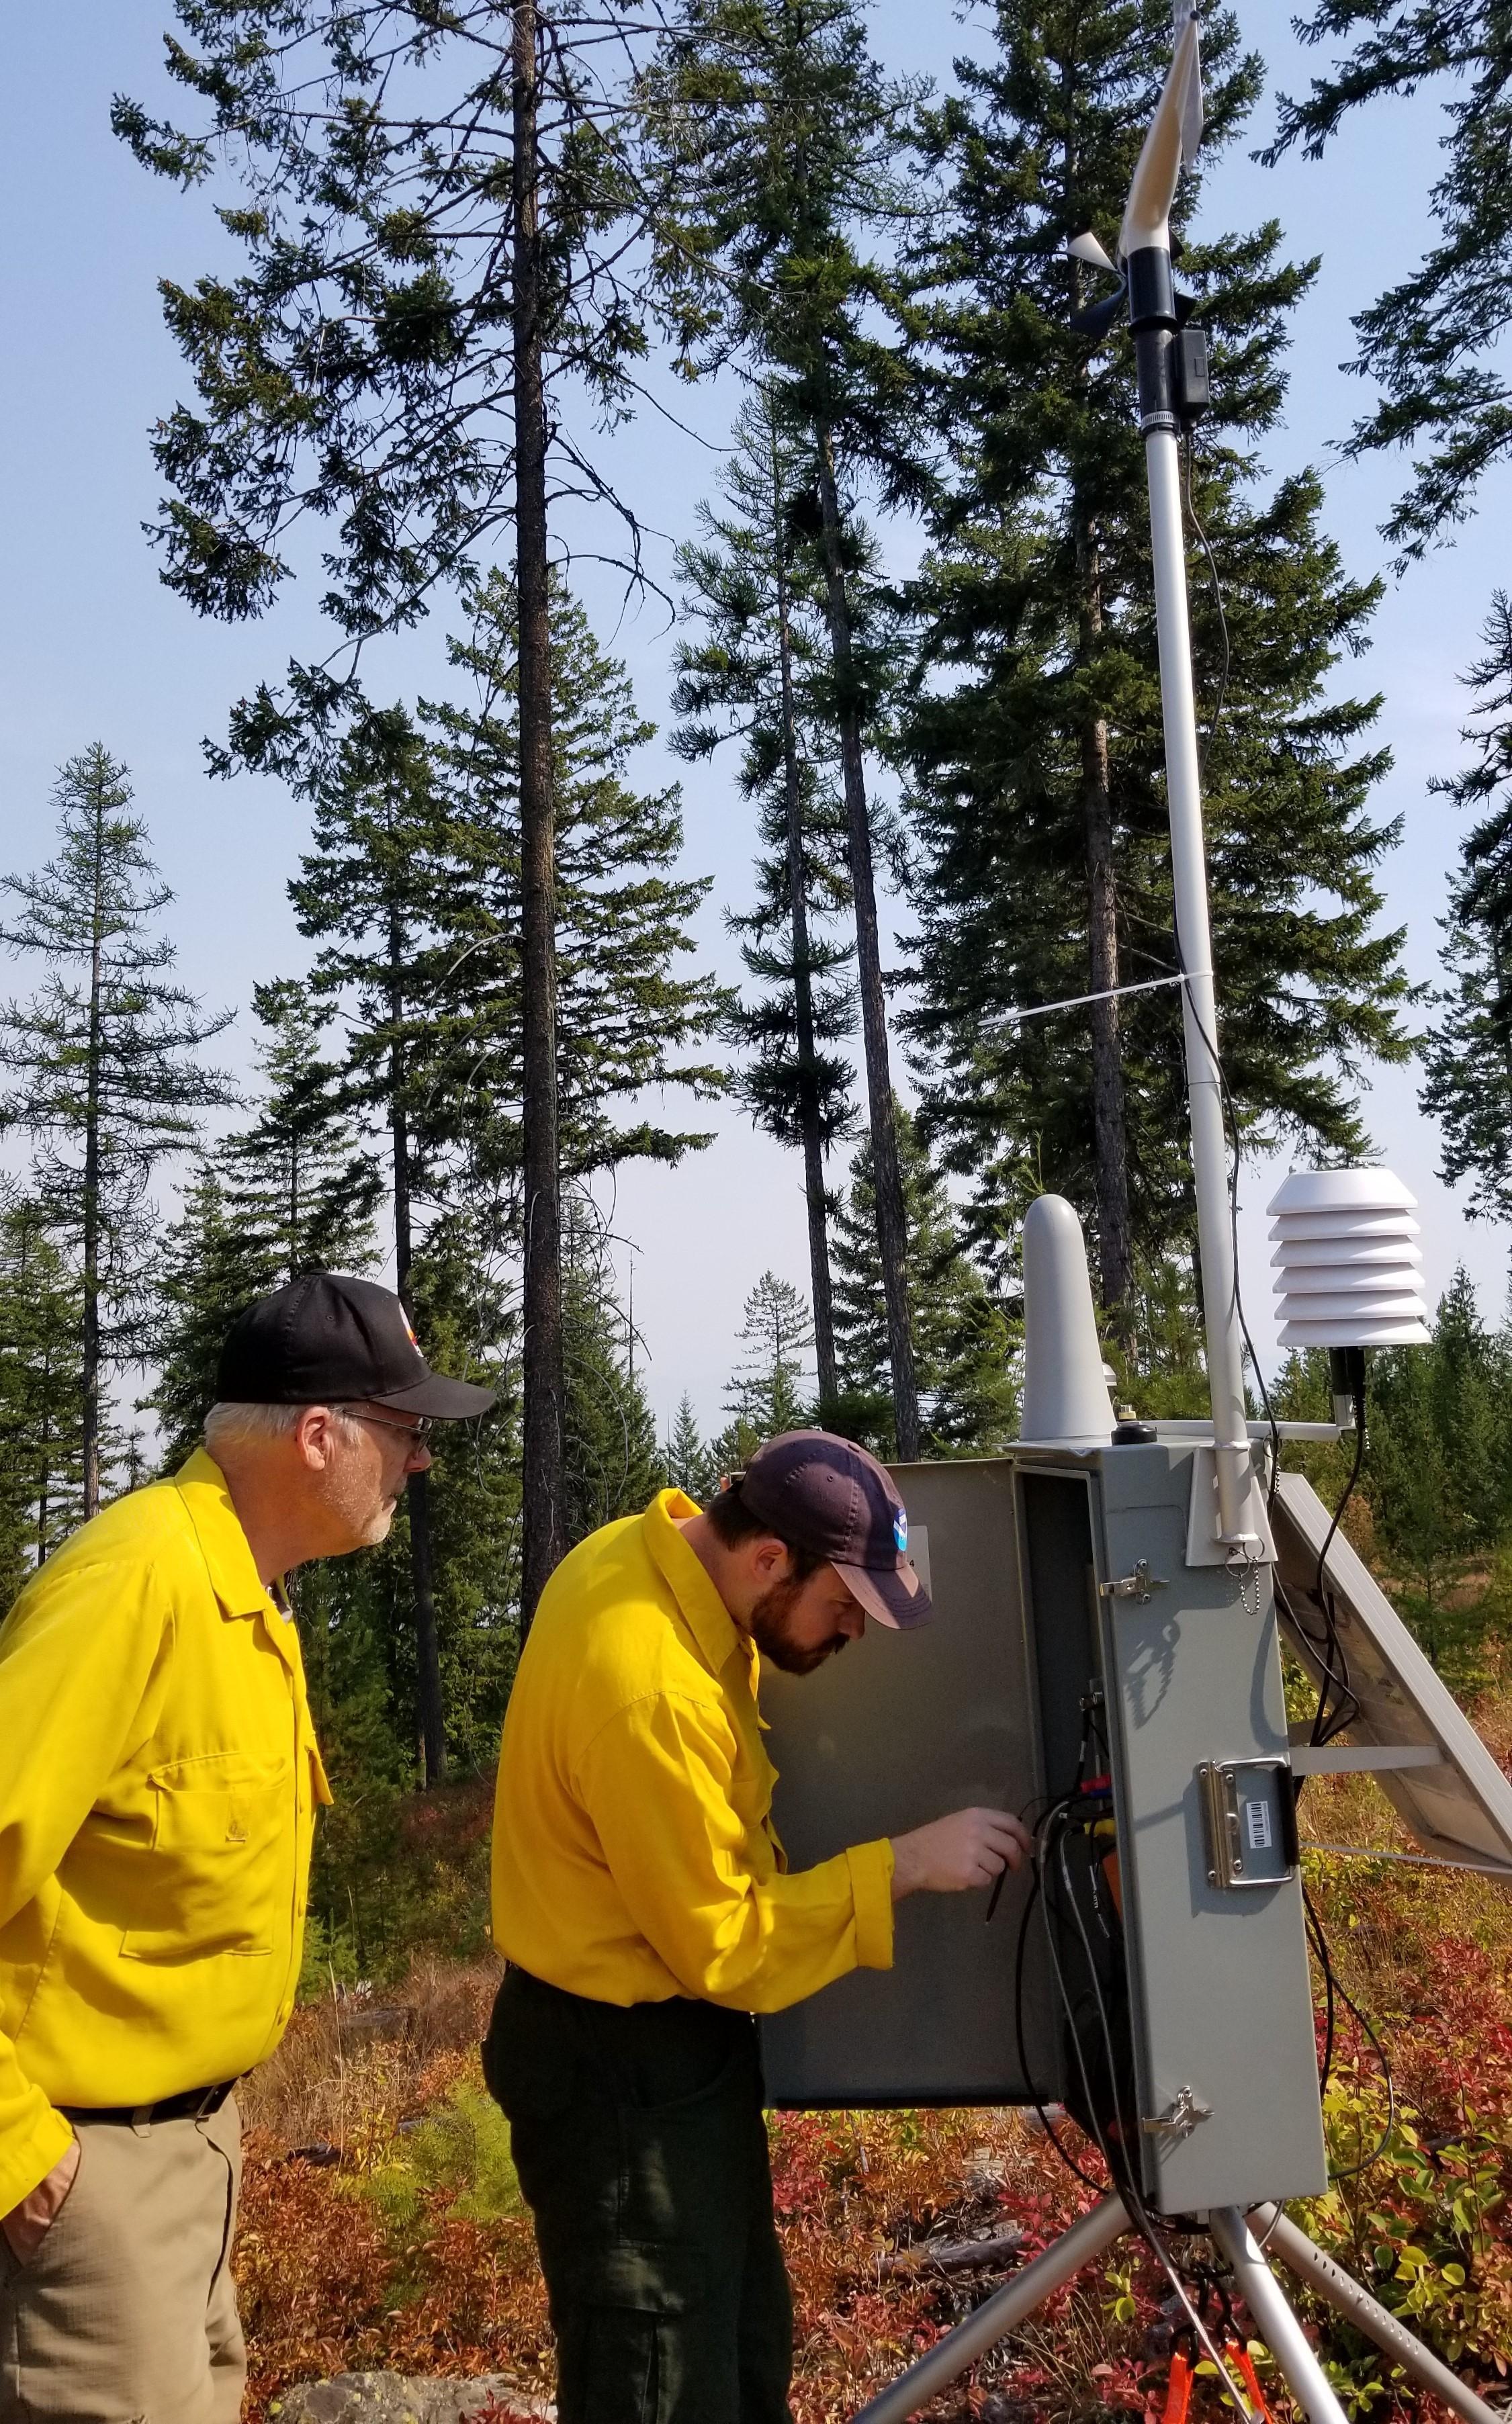 Meteorologist and Fire Behavior Analyst setting up a remote weather station in the field .